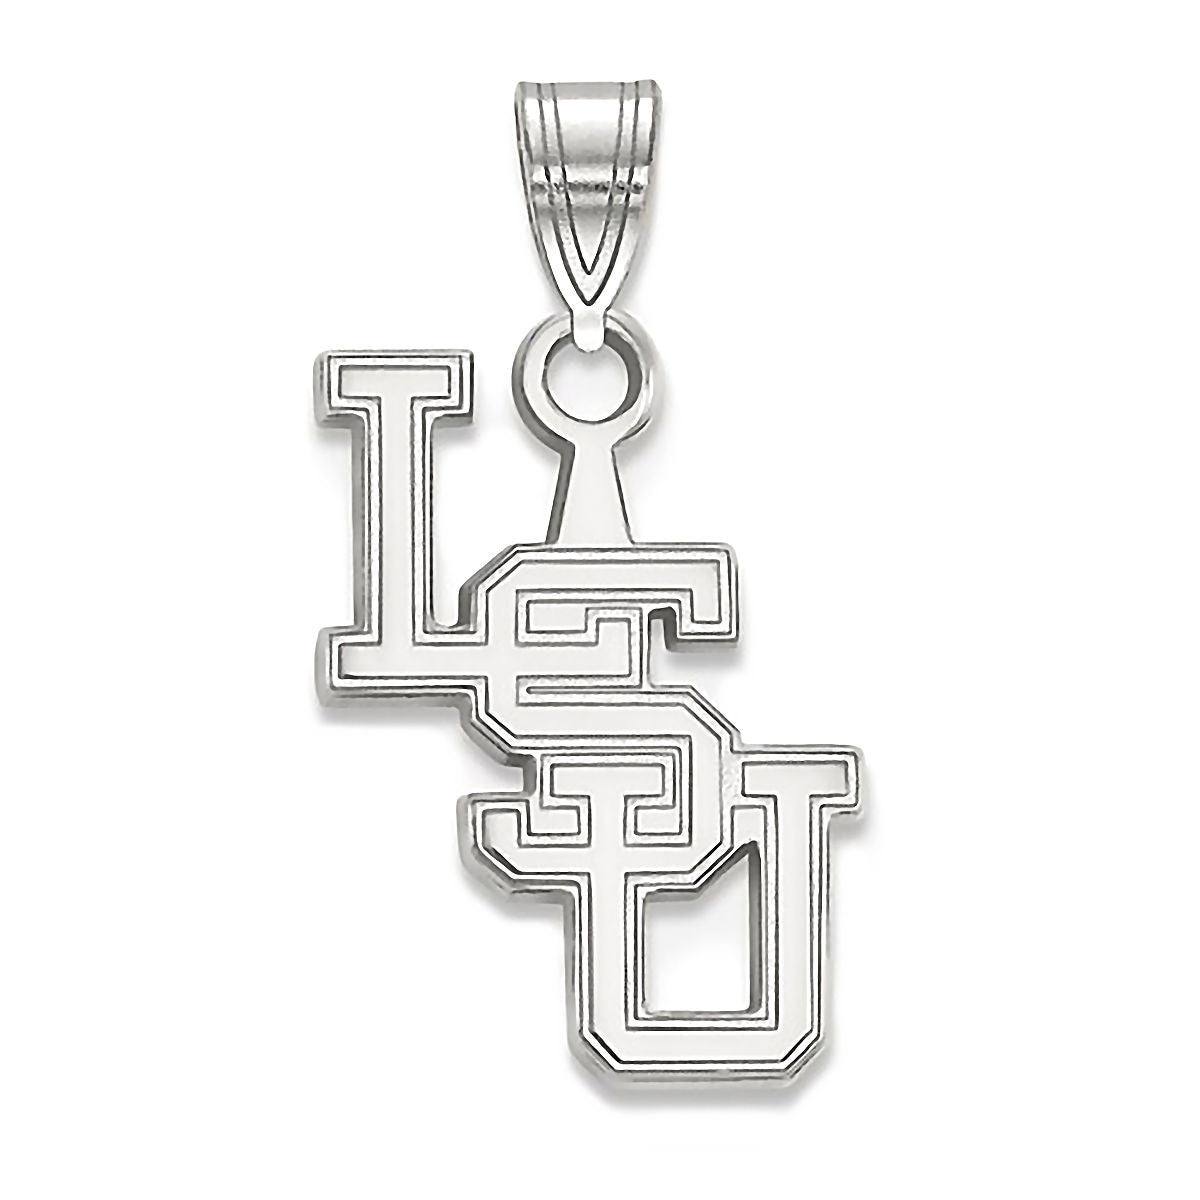 Sterling Silver State of Louisiana Charm Necklace